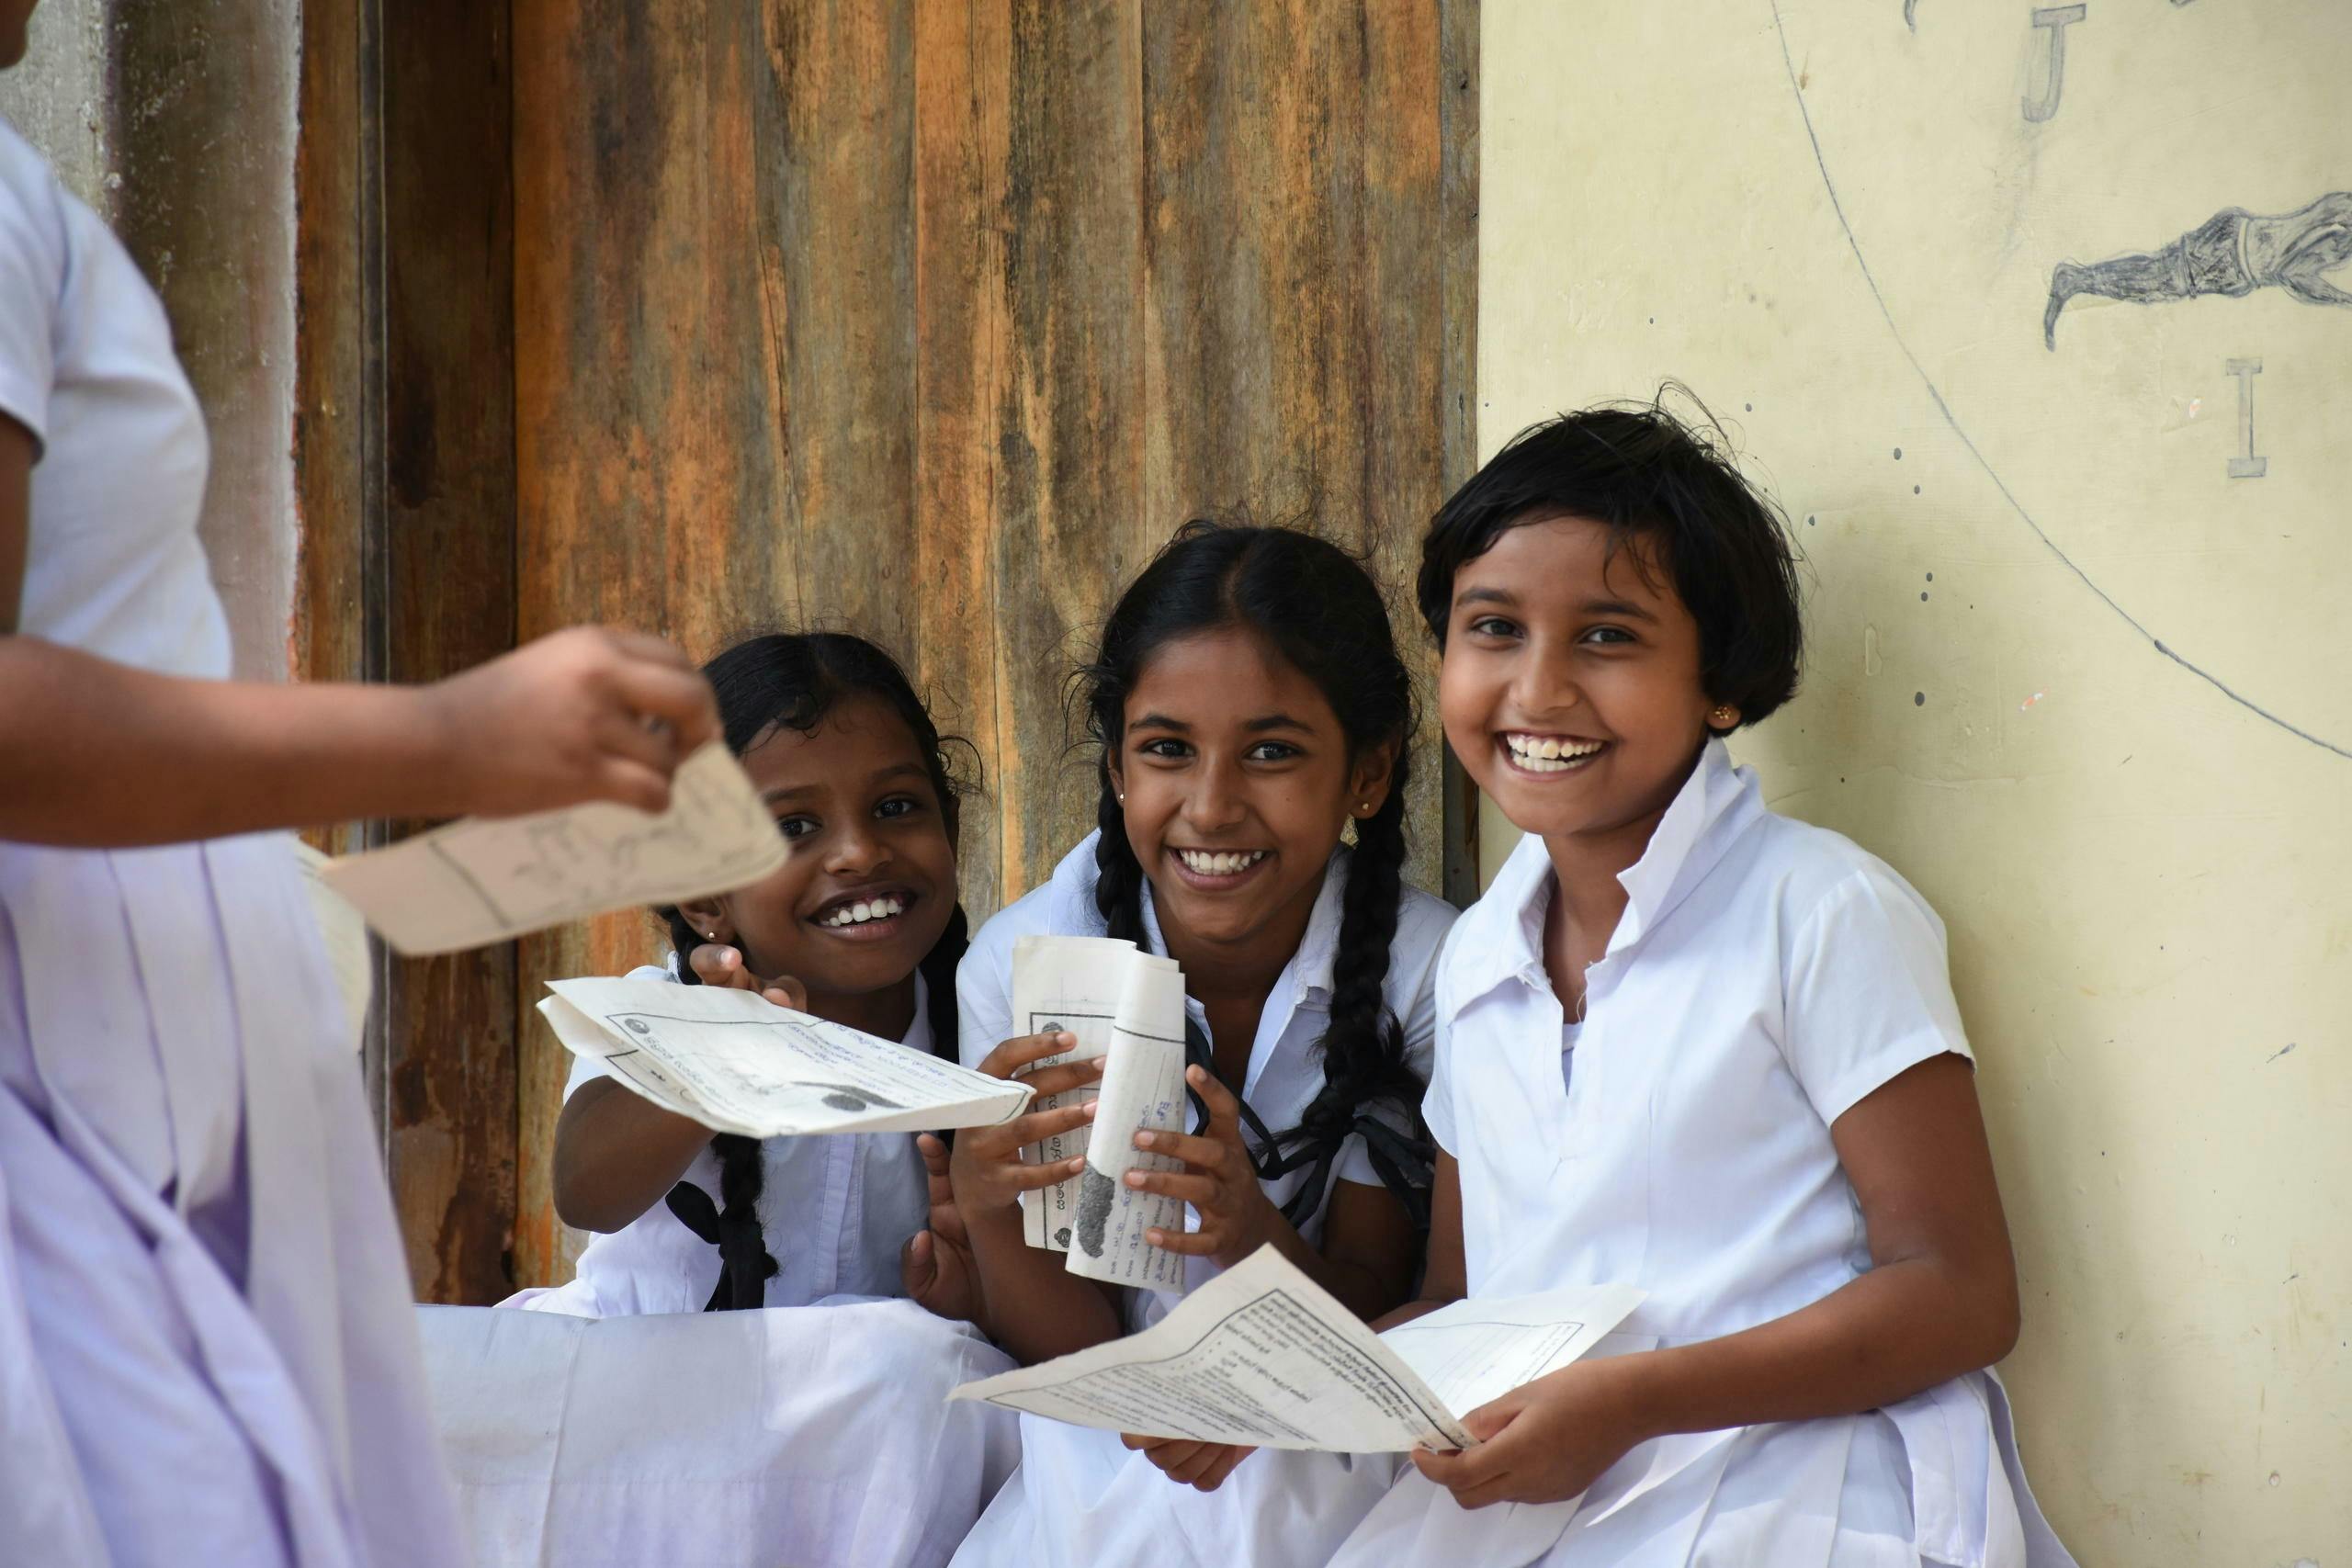 Three laughing girls in their typical white school uniform laugh into the camera. They are holding paper in their hands and sitting outdoors against a wall.